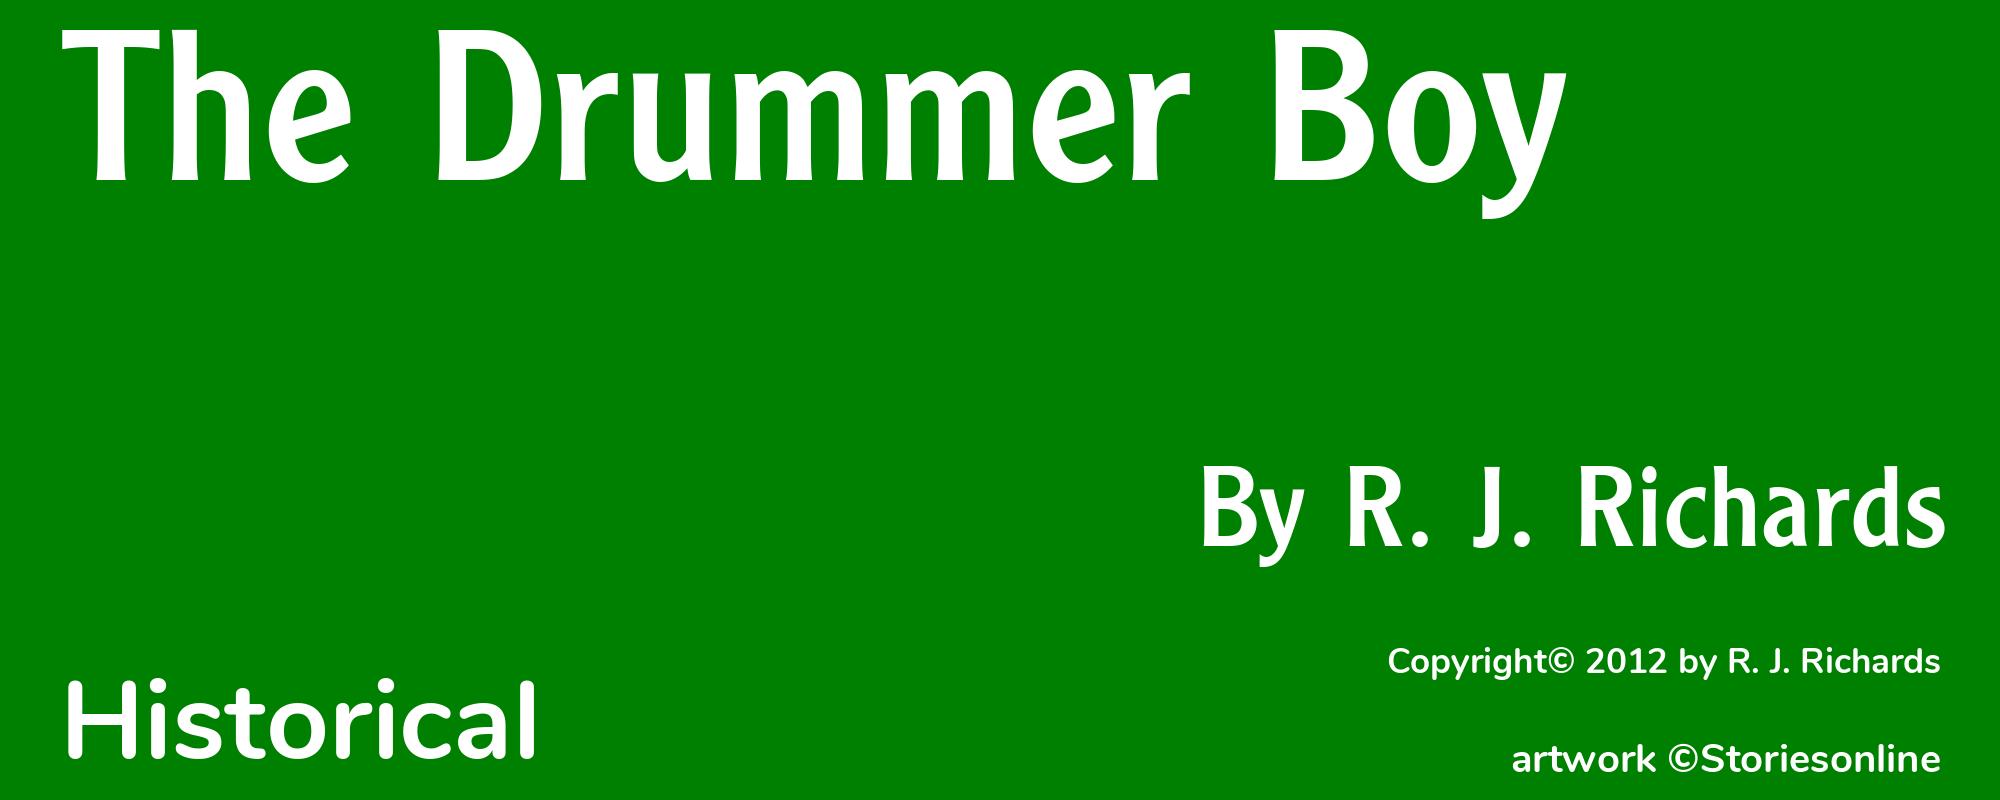 The Drummer Boy - Cover